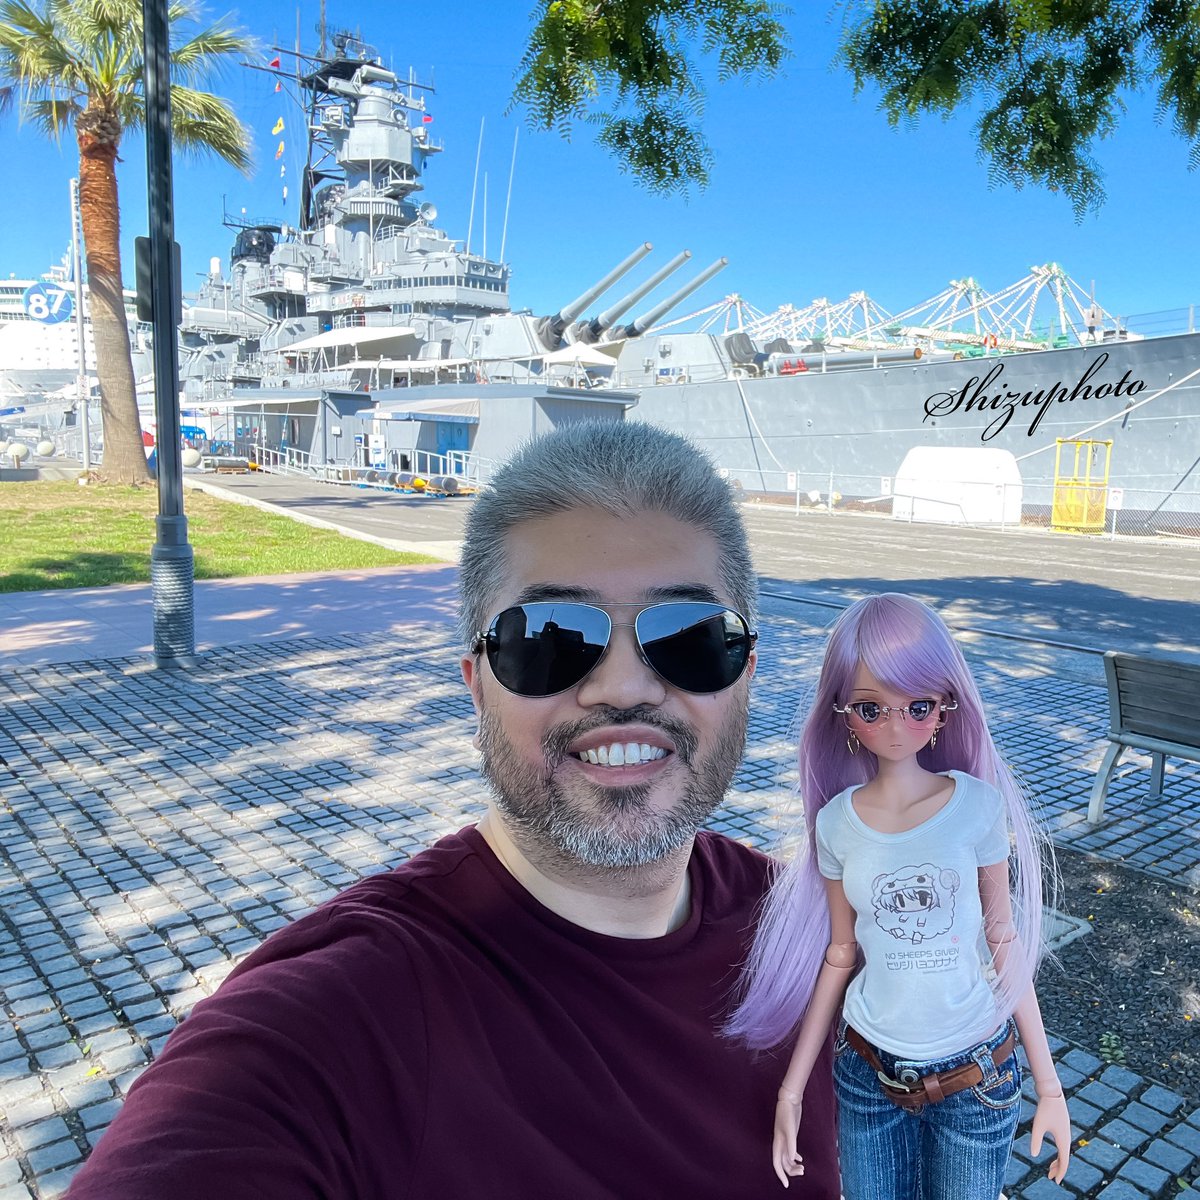 Chitose and I went to see the Battleship Iowa BB-61 in San Pedro CA. This ship is massive and breathtaking to see in person. Chitose and I needed something to lift our spirits and this punched that ticket #smartdoll #dollphotography #dollfashion #chitoseshirasawa #battleshipiowa